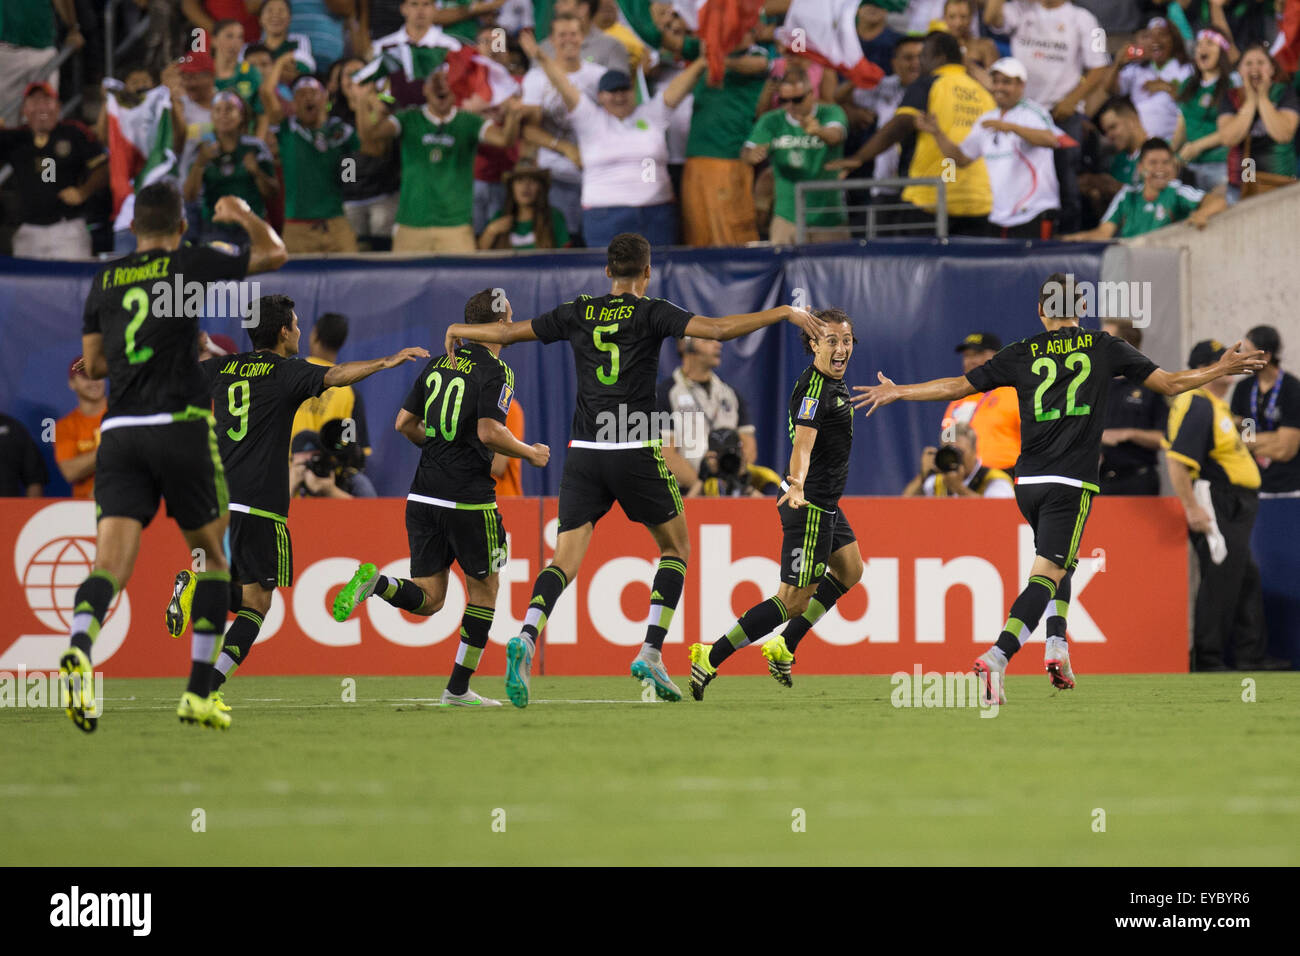 Philadelphia, Pennsylvania, USA. 26th July, 2015. Mexico midfielder Andres Guardado (18) reacts to his goal as his teammates celebrate during the CONCACAF Gold Cup 2015 Final match between Jamaica and Mexico at Lincoln Financial Field in Philadelphia, Pennsylvania. Christopher Szagola/CSM/Alamy Live News Stock Photo